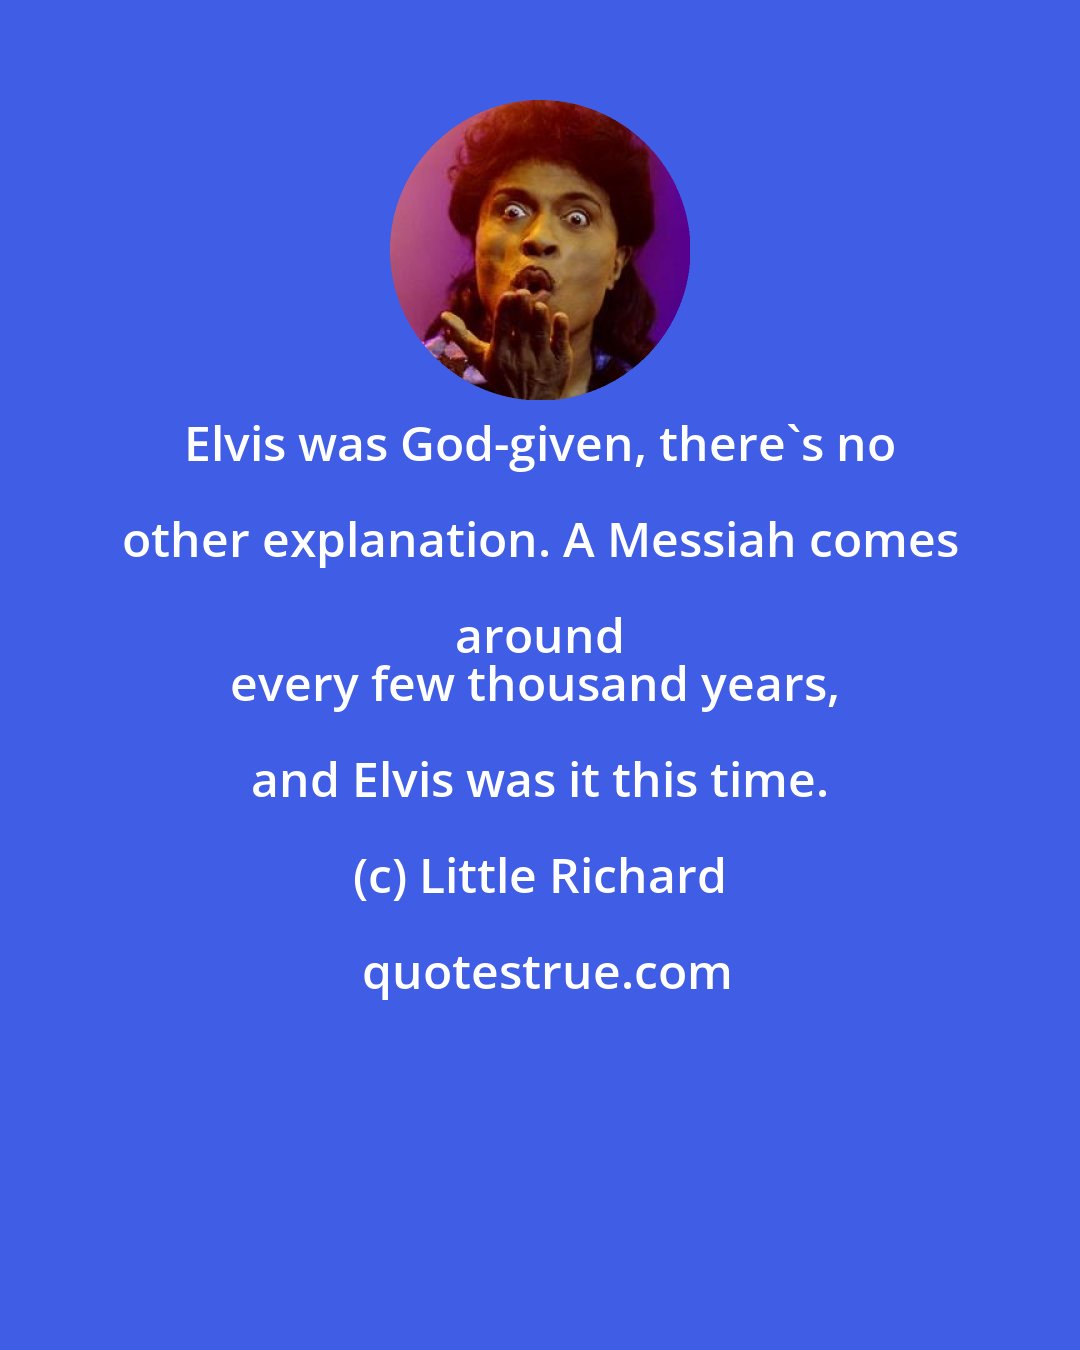 Little Richard: Elvis was God-given, there's no other explanation. A Messiah comes around 
every few thousand years, and Elvis was it this time.